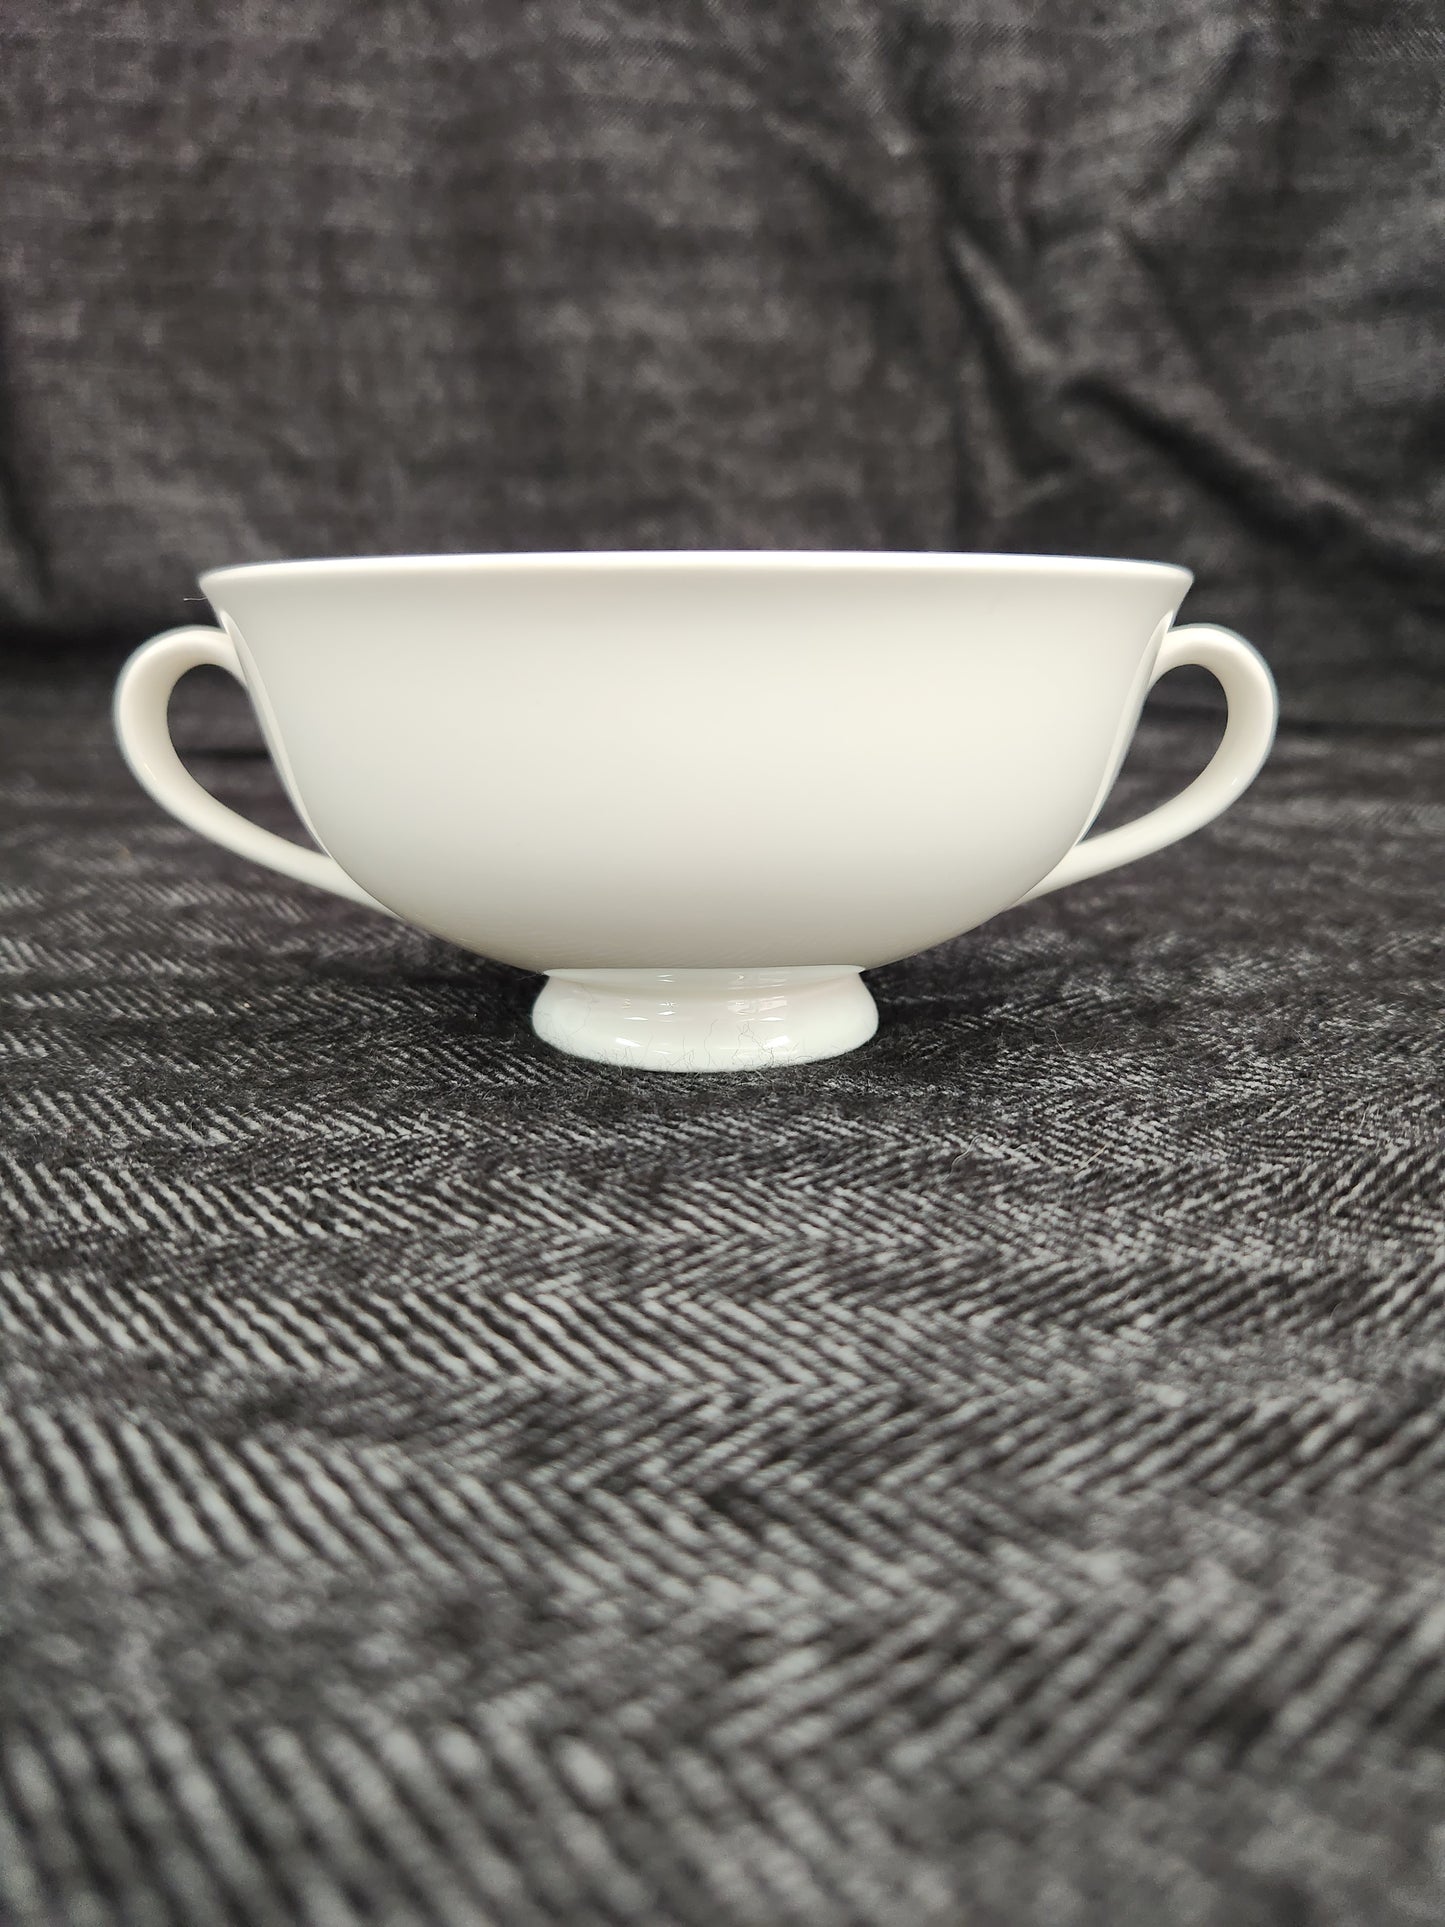 Concord Platinum Footed Cream Soup Bowl by Royal Doulton - #H5048